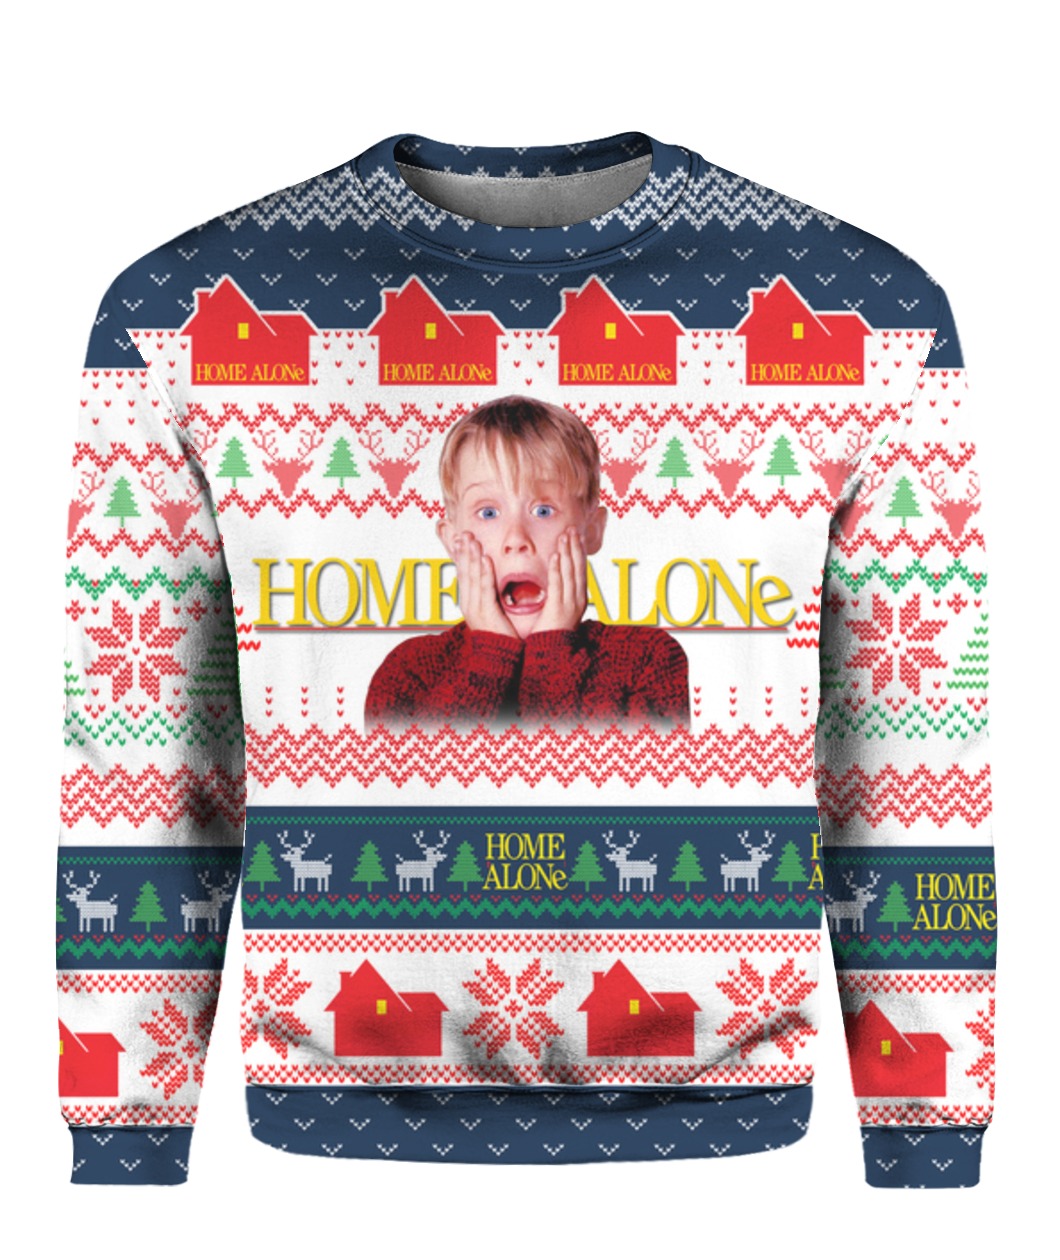 Home alone full printing ugly christmas sweater 4